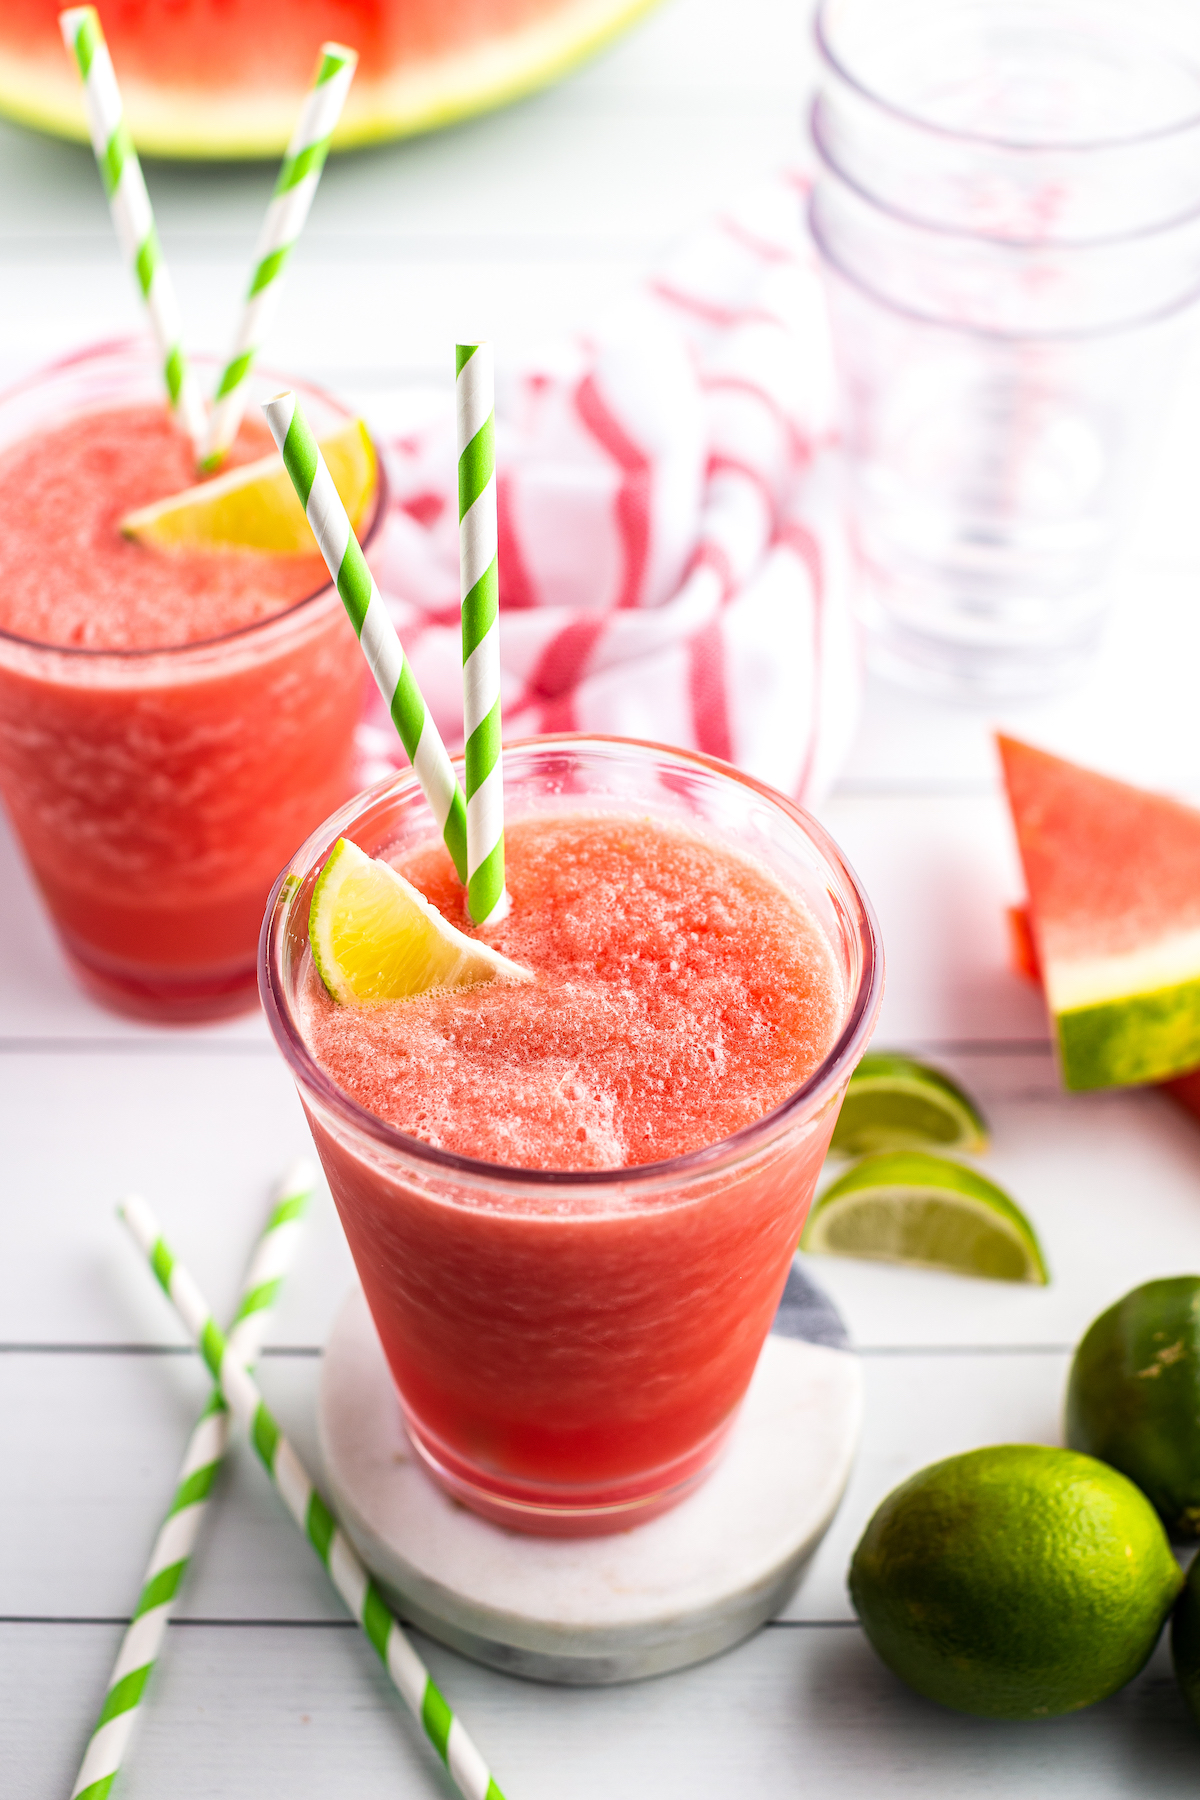 Two side-by-side watermelon limeade slushies in glasses garnished with lime wedges and striped straws.